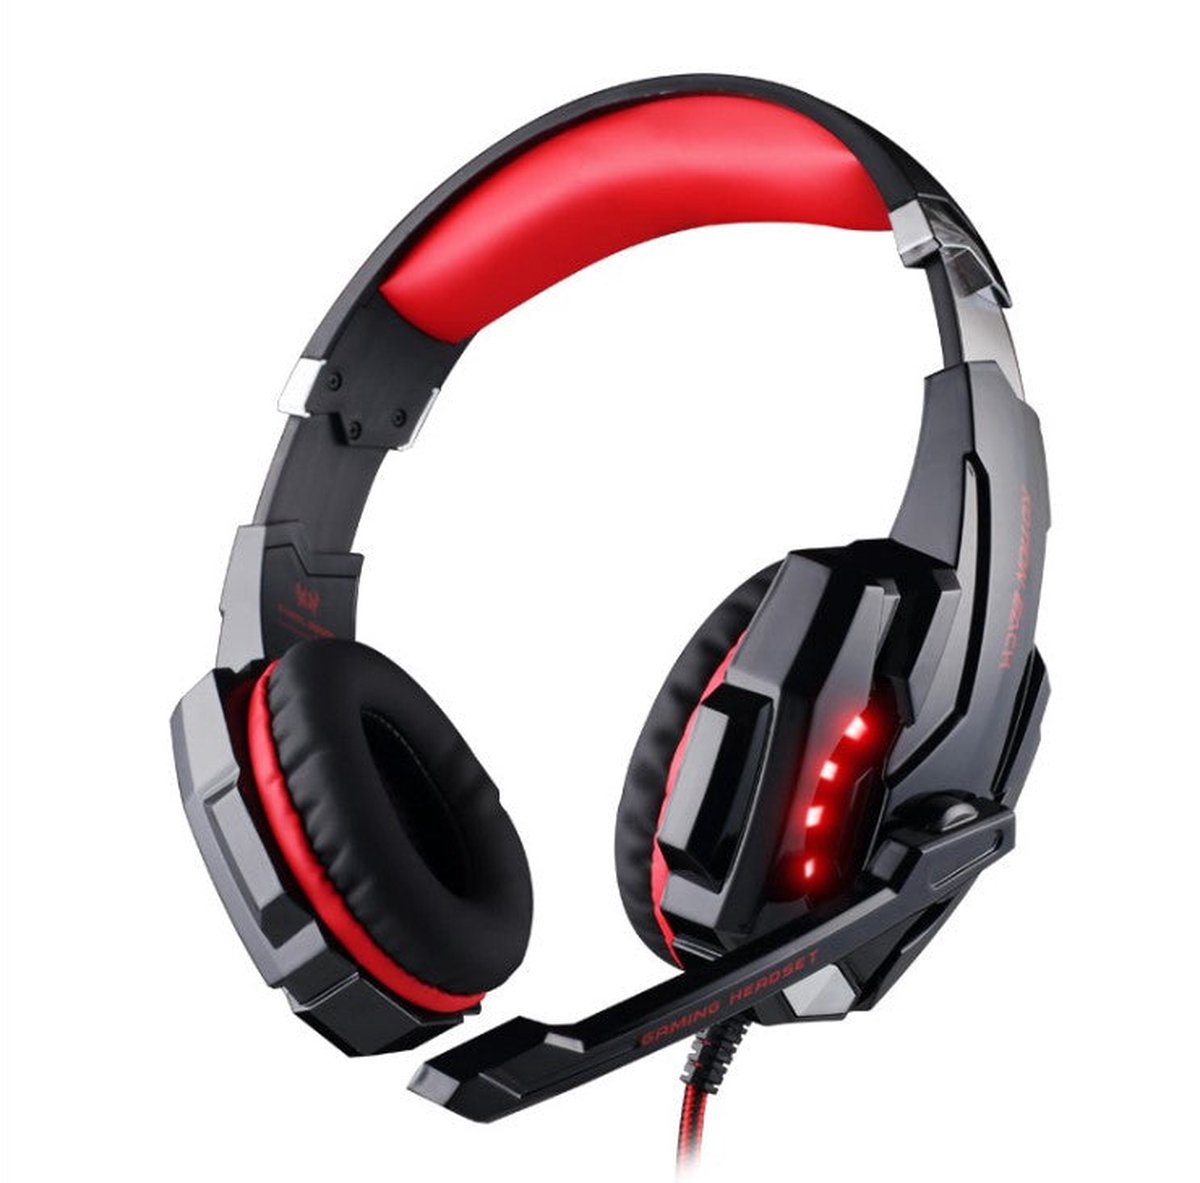 G2000 headset gaming headset computer wired gaming chicken headset